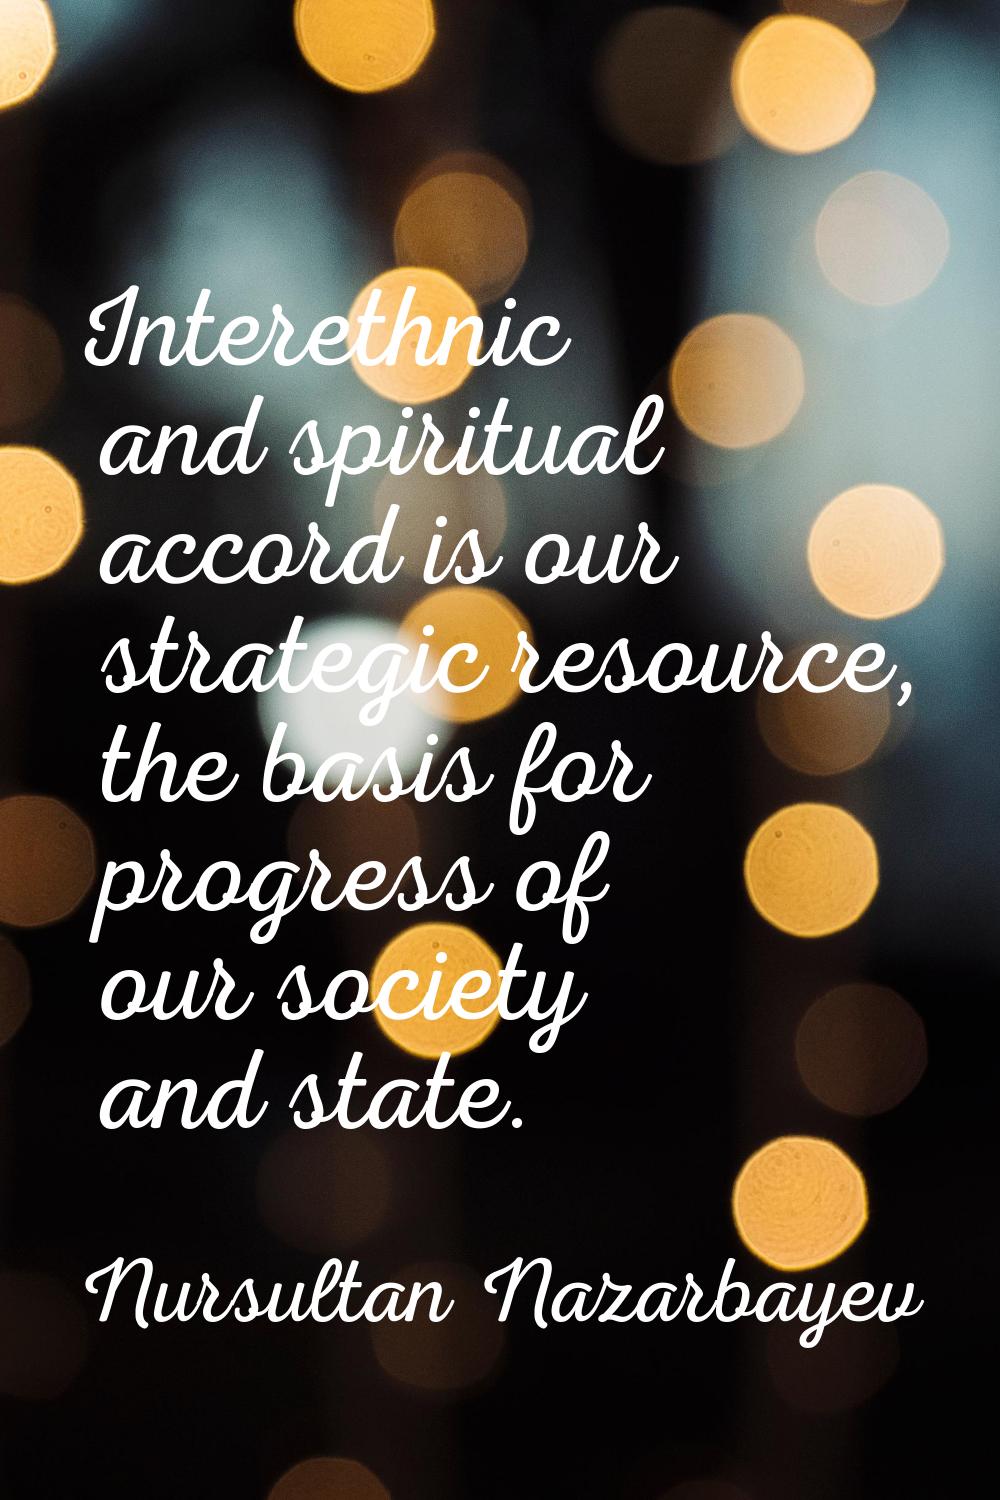 Interethnic and spiritual accord is our strategic resource, the basis for progress of our society a